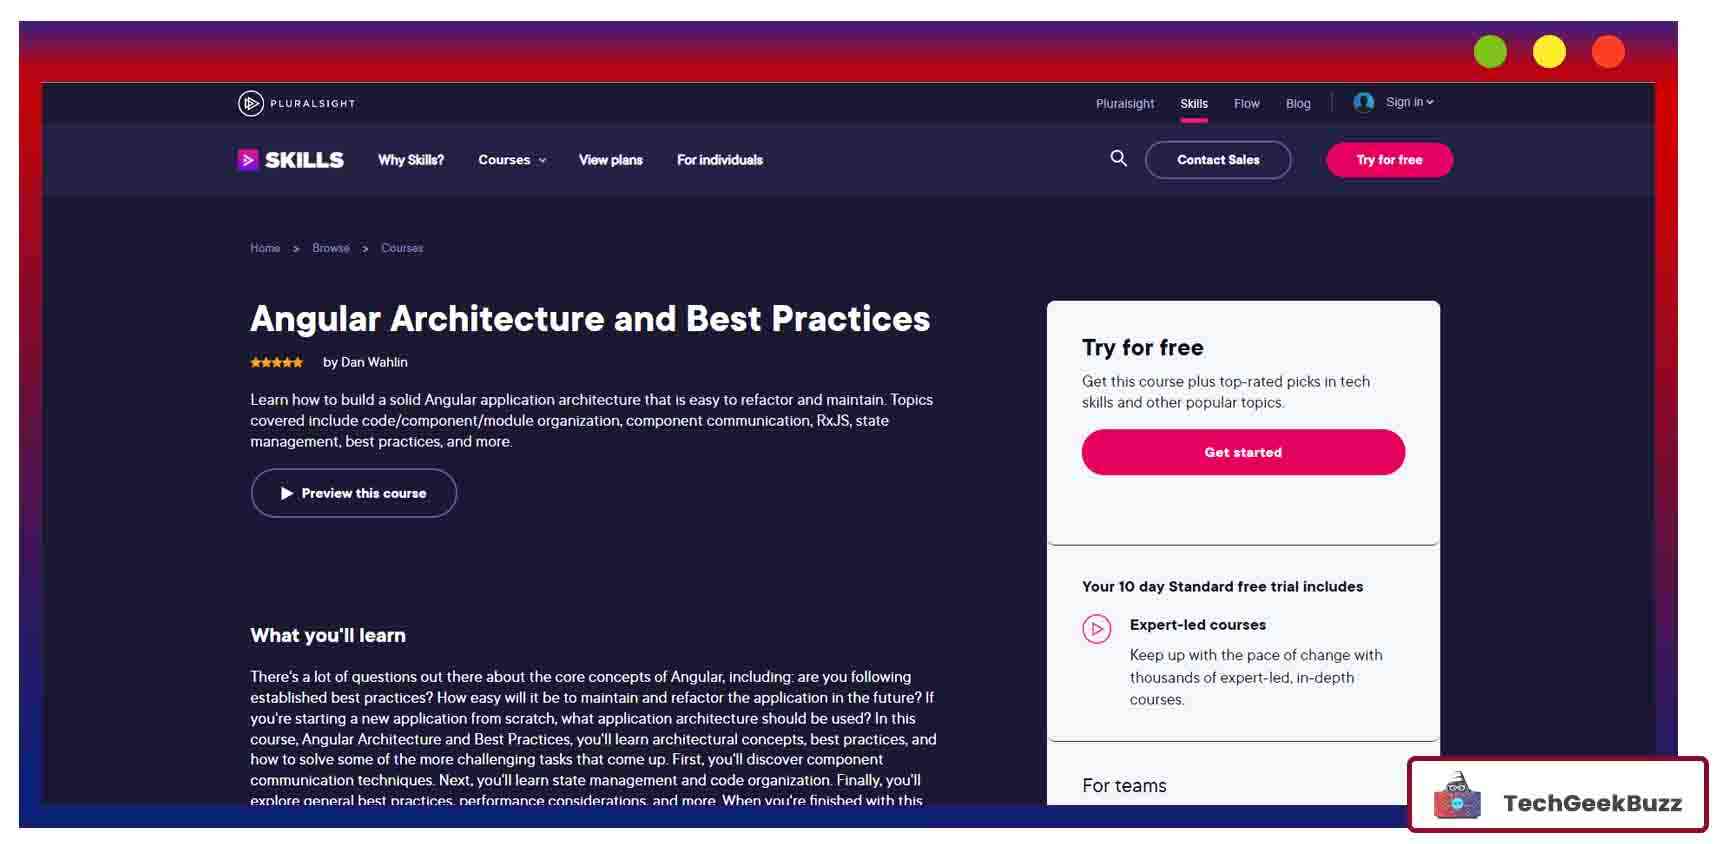 Angular Architecture and Best Practices